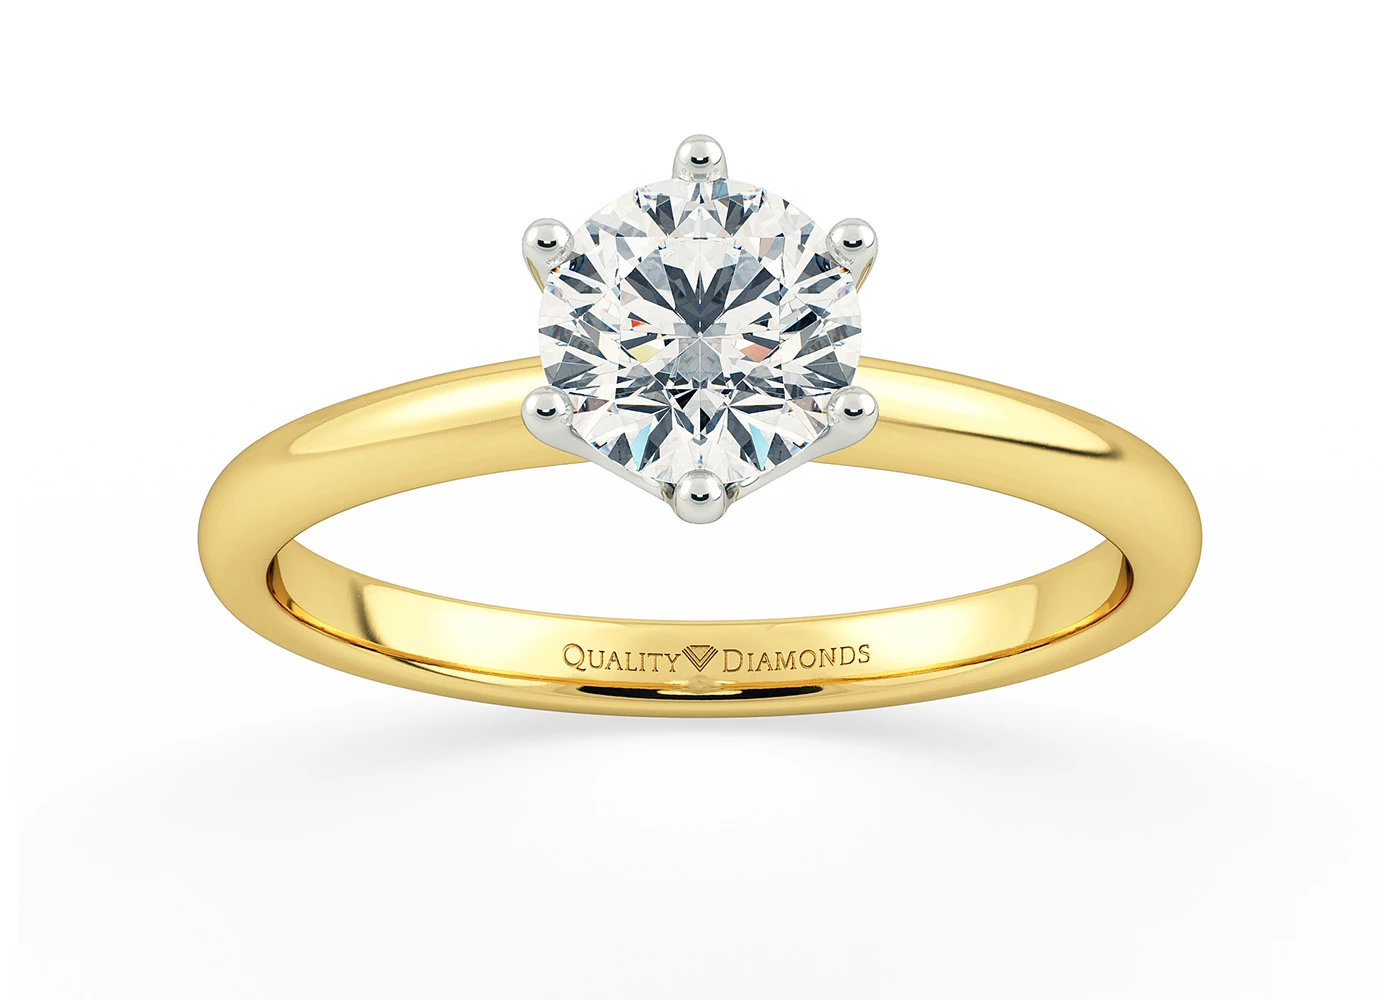 Round Brilliant Amore Diamond Ring in 18K Yellow Gold